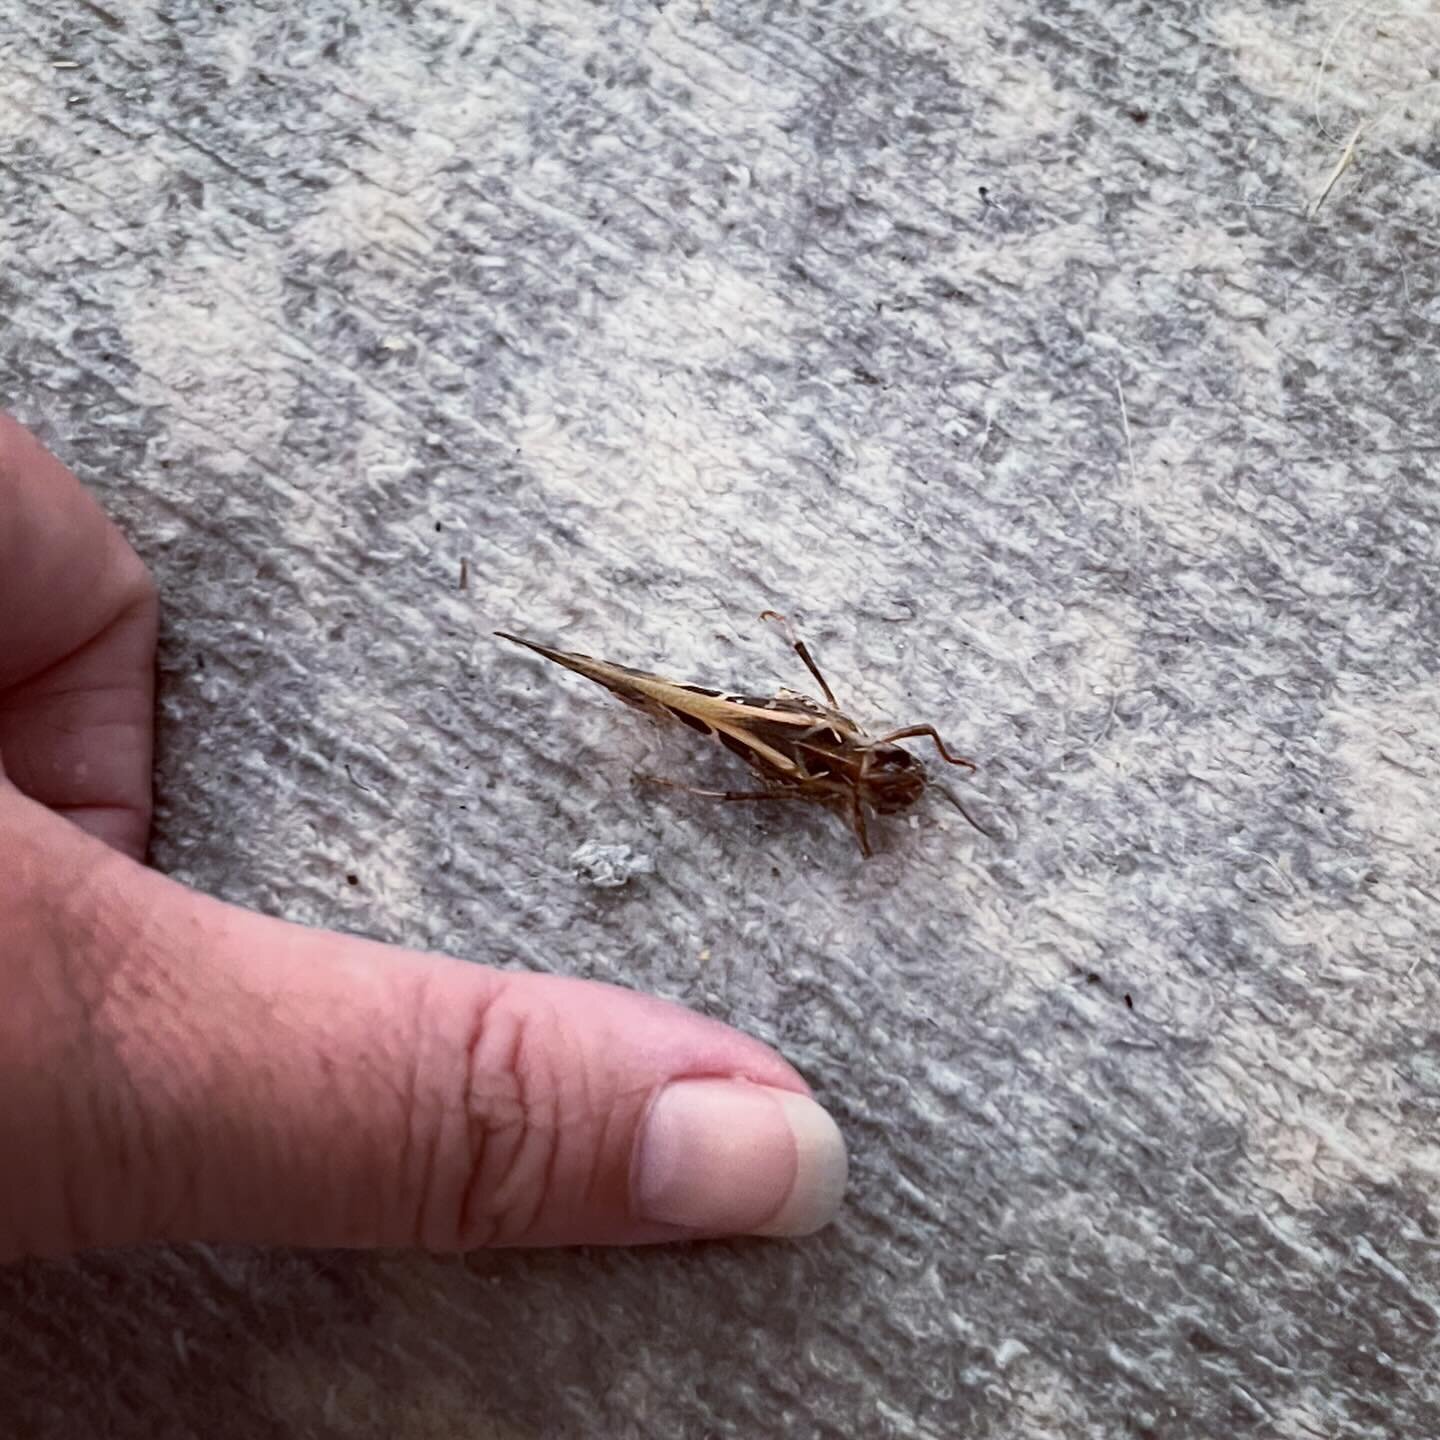 This week in Bugs, and much to my chagrin this one came INSIDE, Oedaleus australis, the Band Winged Grasshopper. 

This one was partially deceased when I found it, which I assume means security (Chicken) got to first. Can&rsquo;t say I&rsquo;m too sa